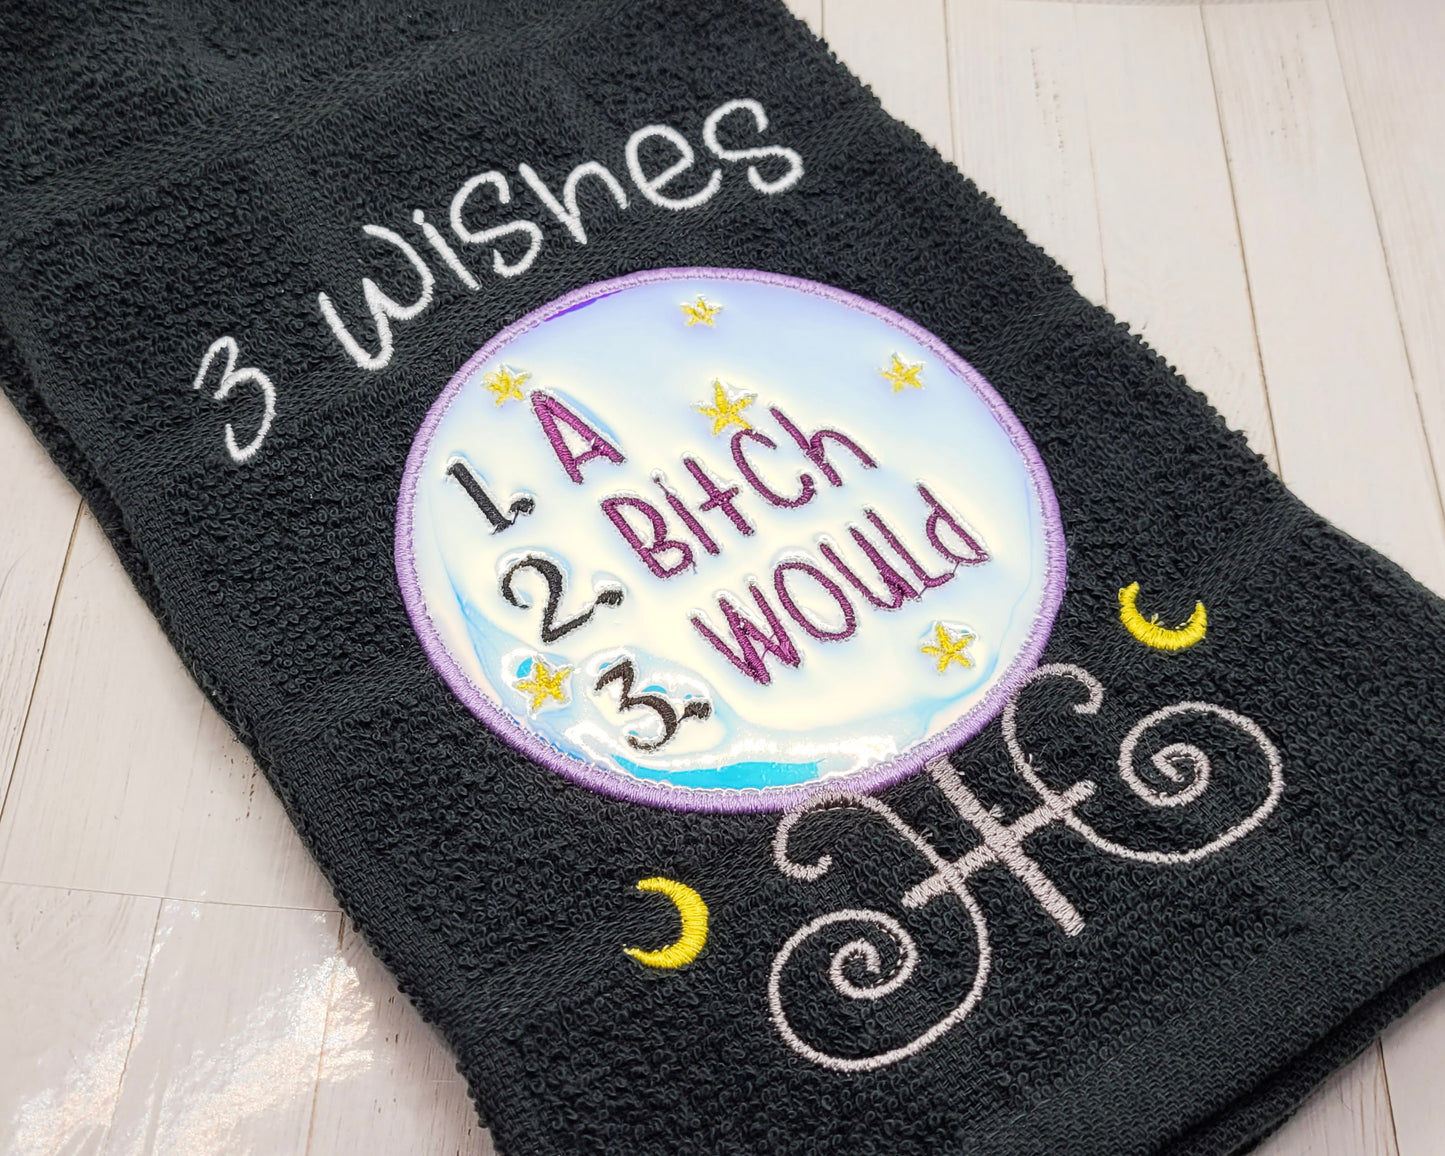 3 Wishes Embroidered Hand & Tea Towel